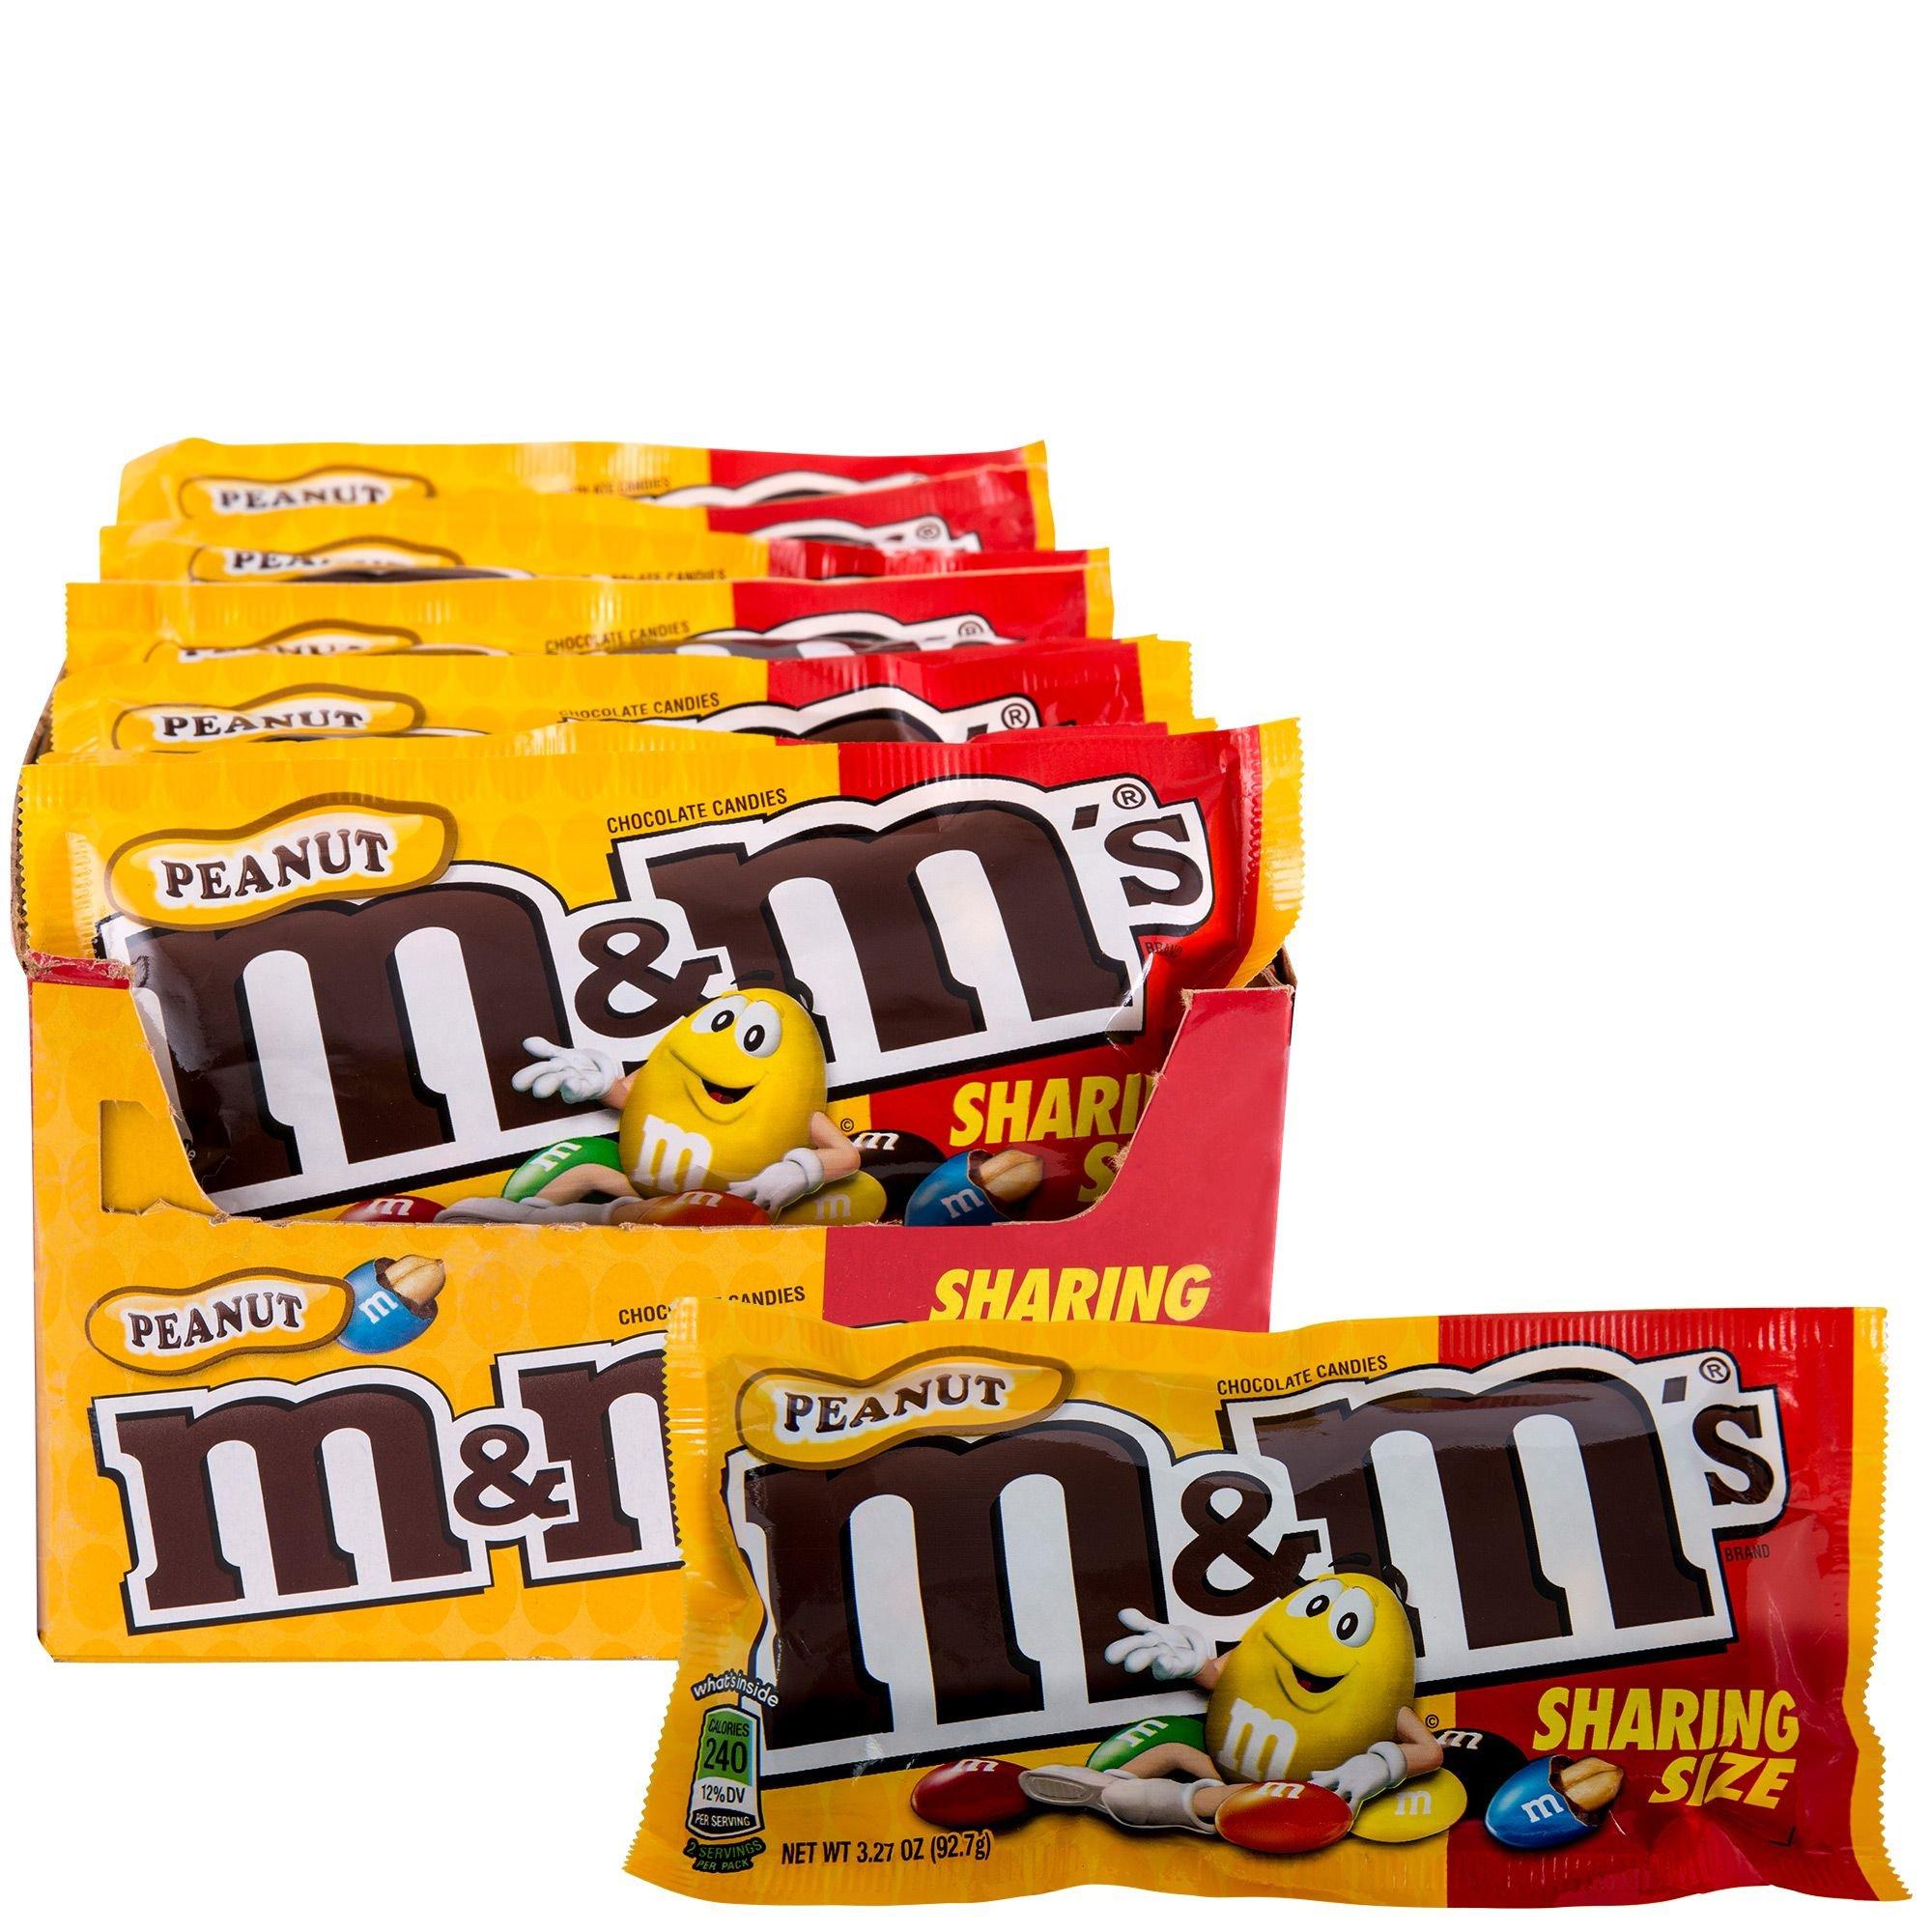  M&M'S Peanut Chocolate Candy Sharing Size Pouch 3.27